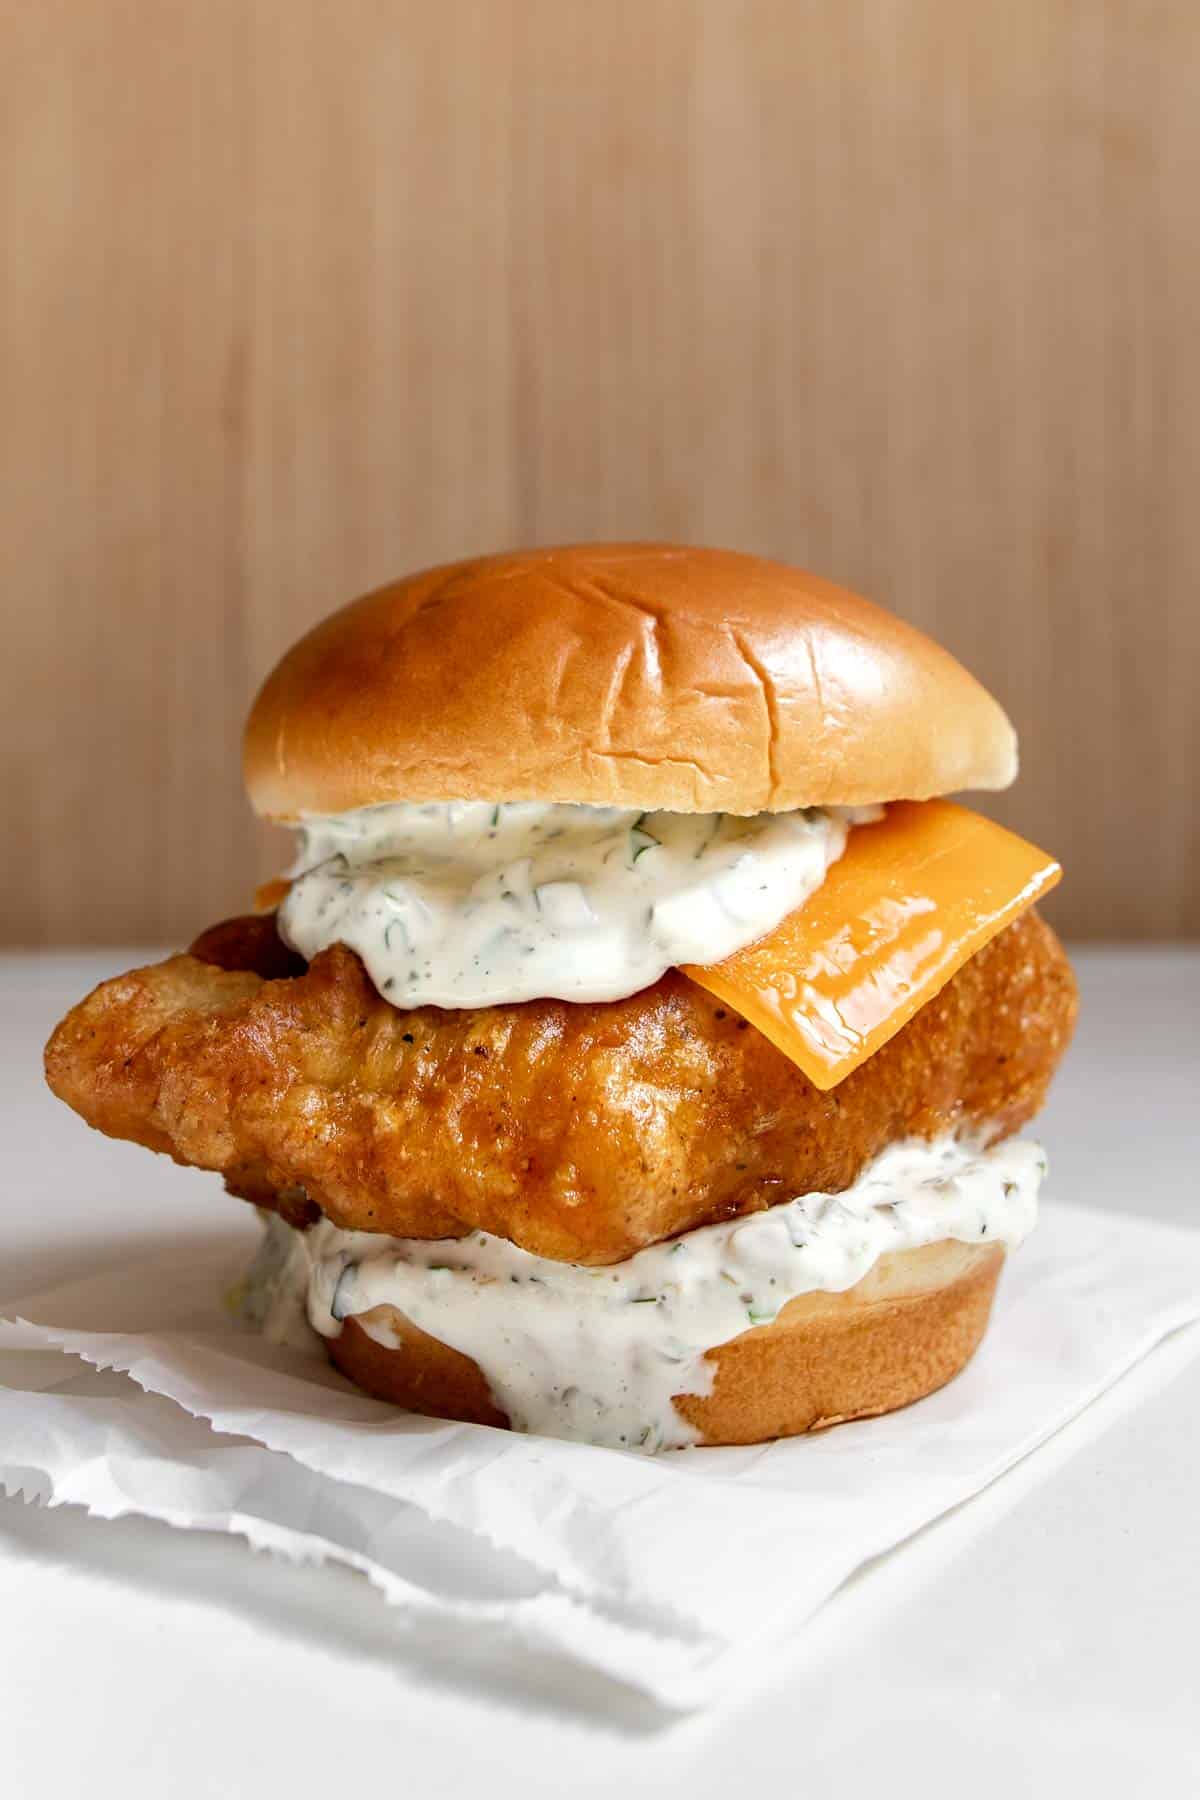 fried cod fish sandwich (homemade filet-o-fish) on a table.